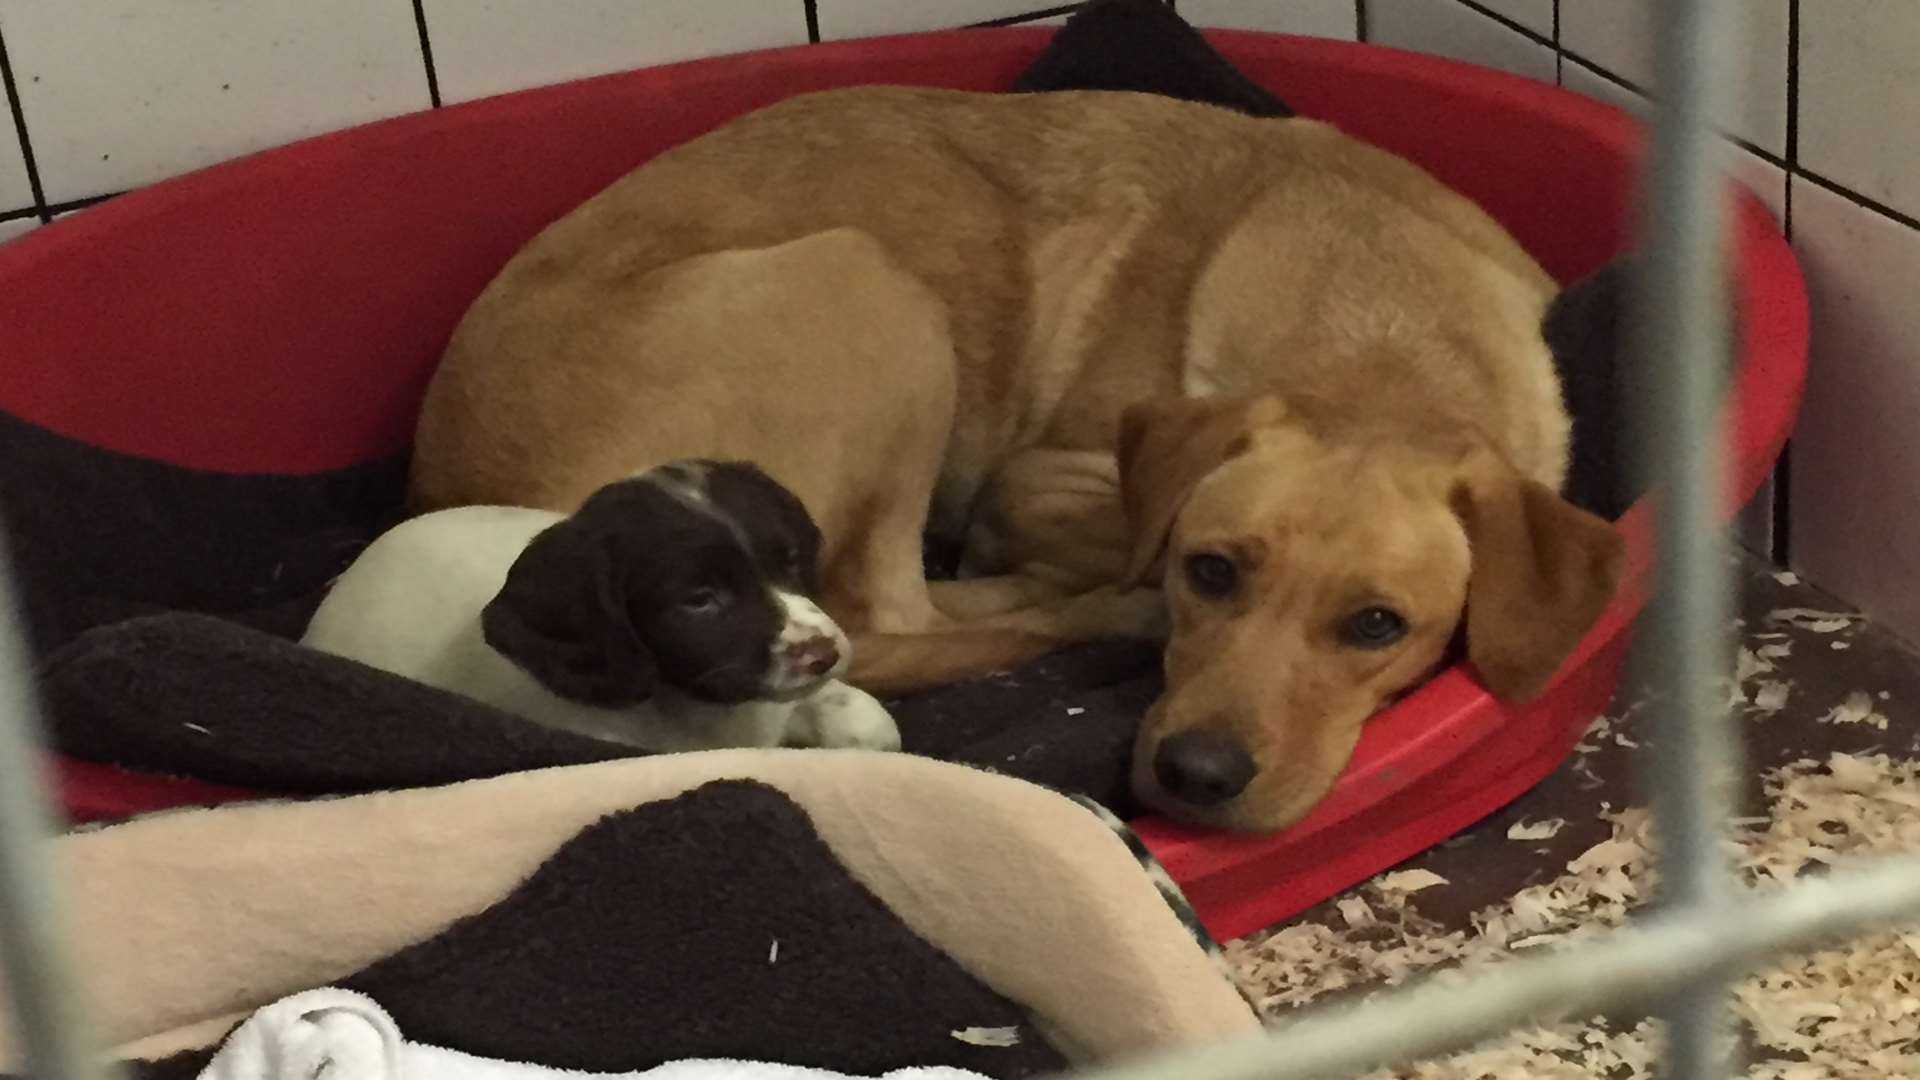 Lucy the springer pup cuddled up in her kennel with one of Leigh's labradors.